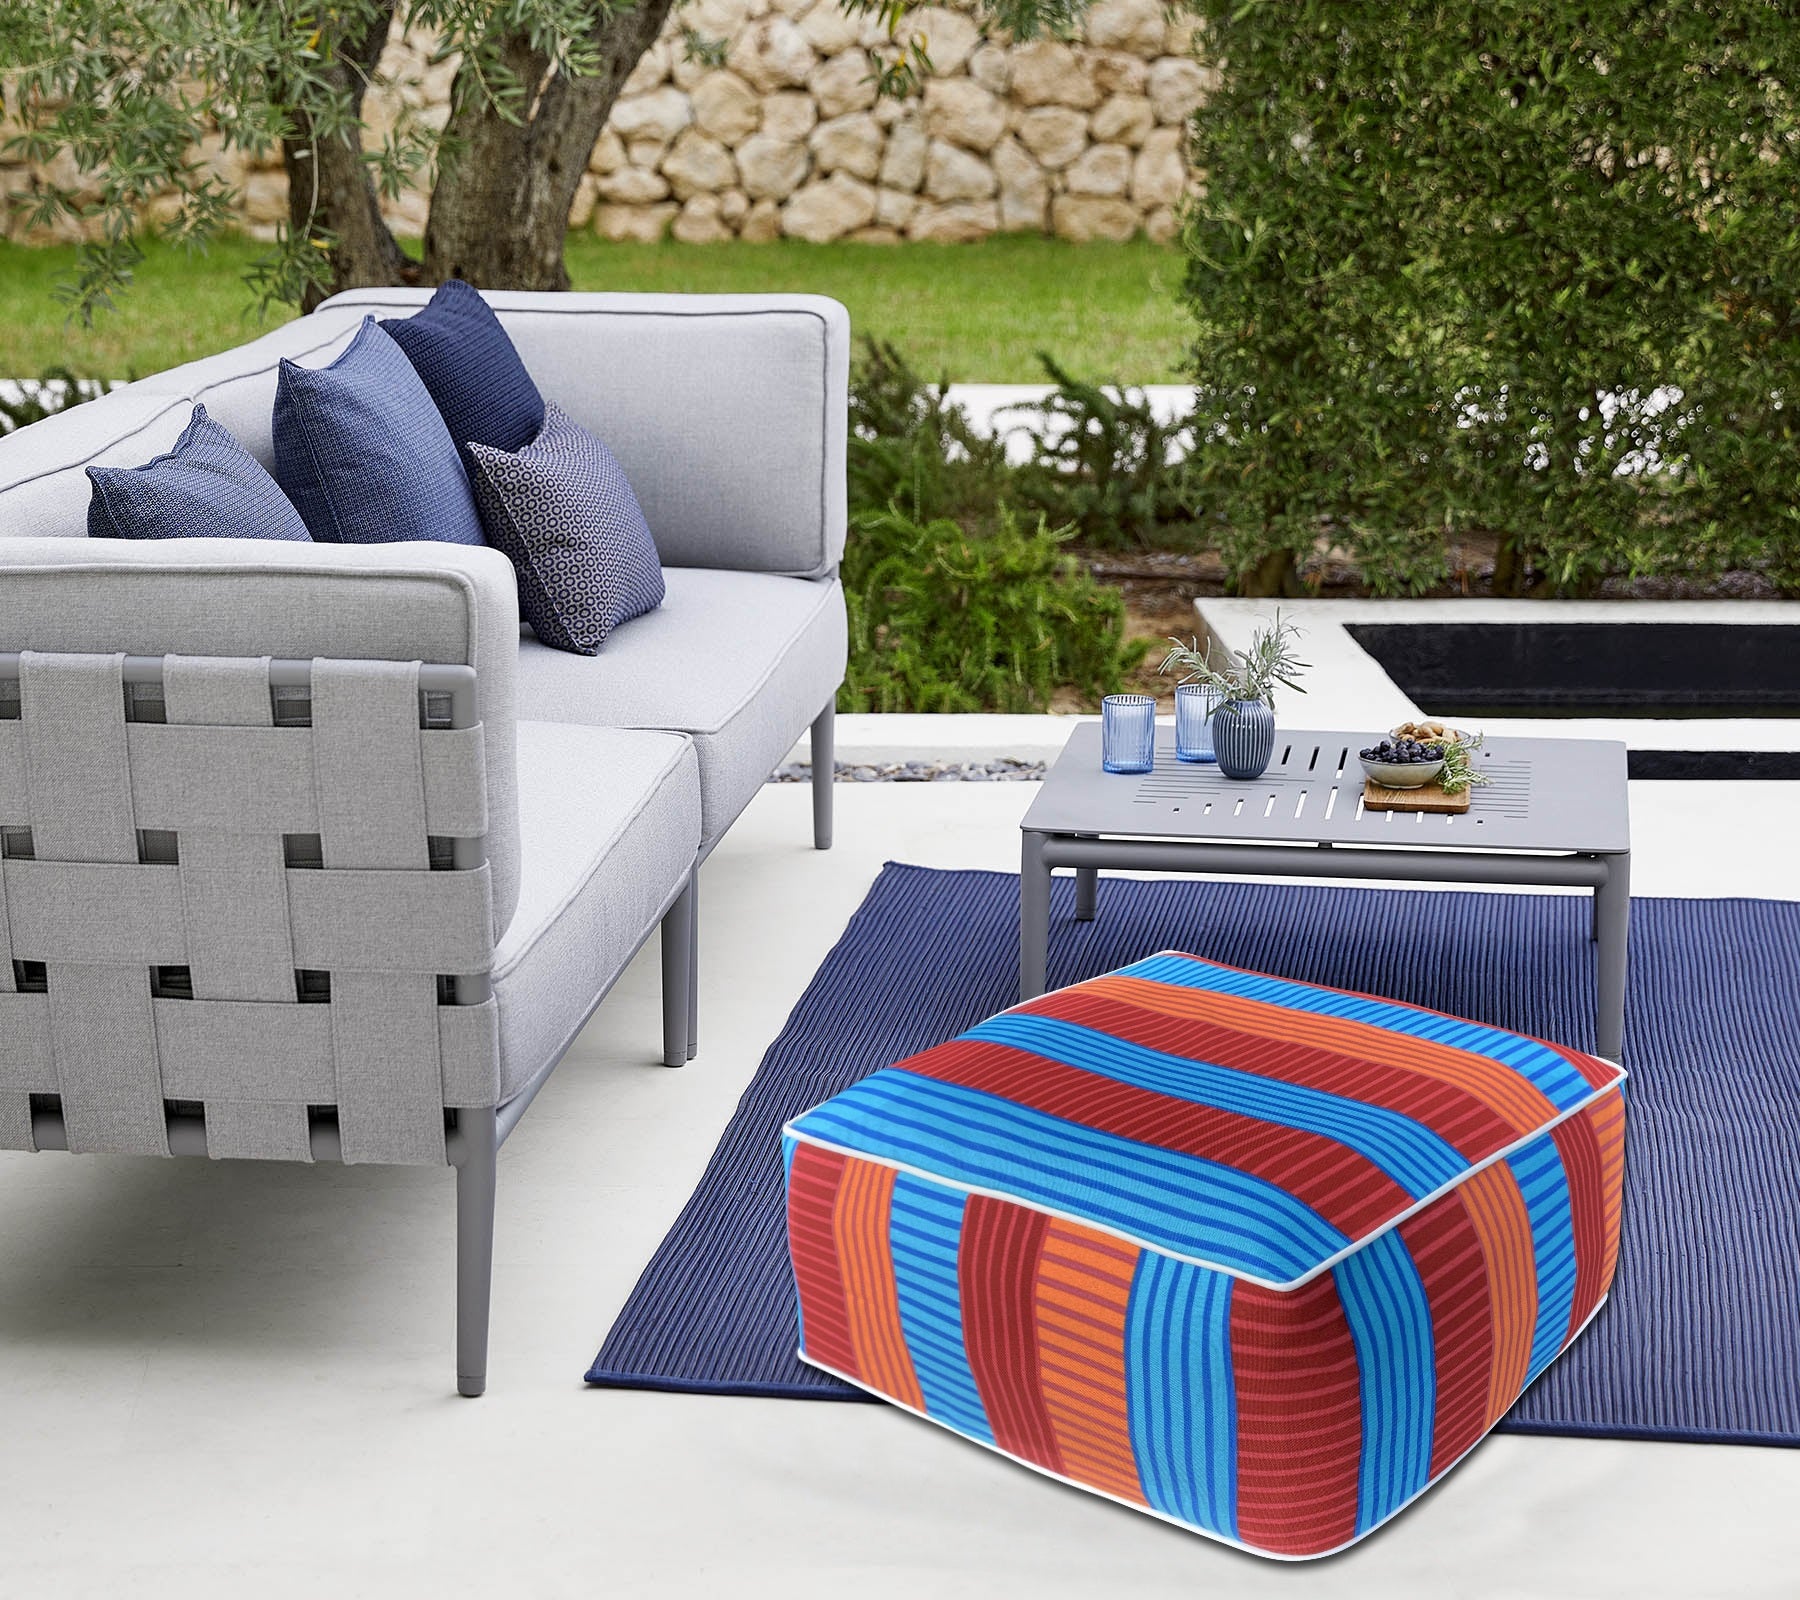 Outdoor Inflatable Ottoman Red and Navy Stripe Square 23x23x9 Inch Patio Foot Stools and Ottomans